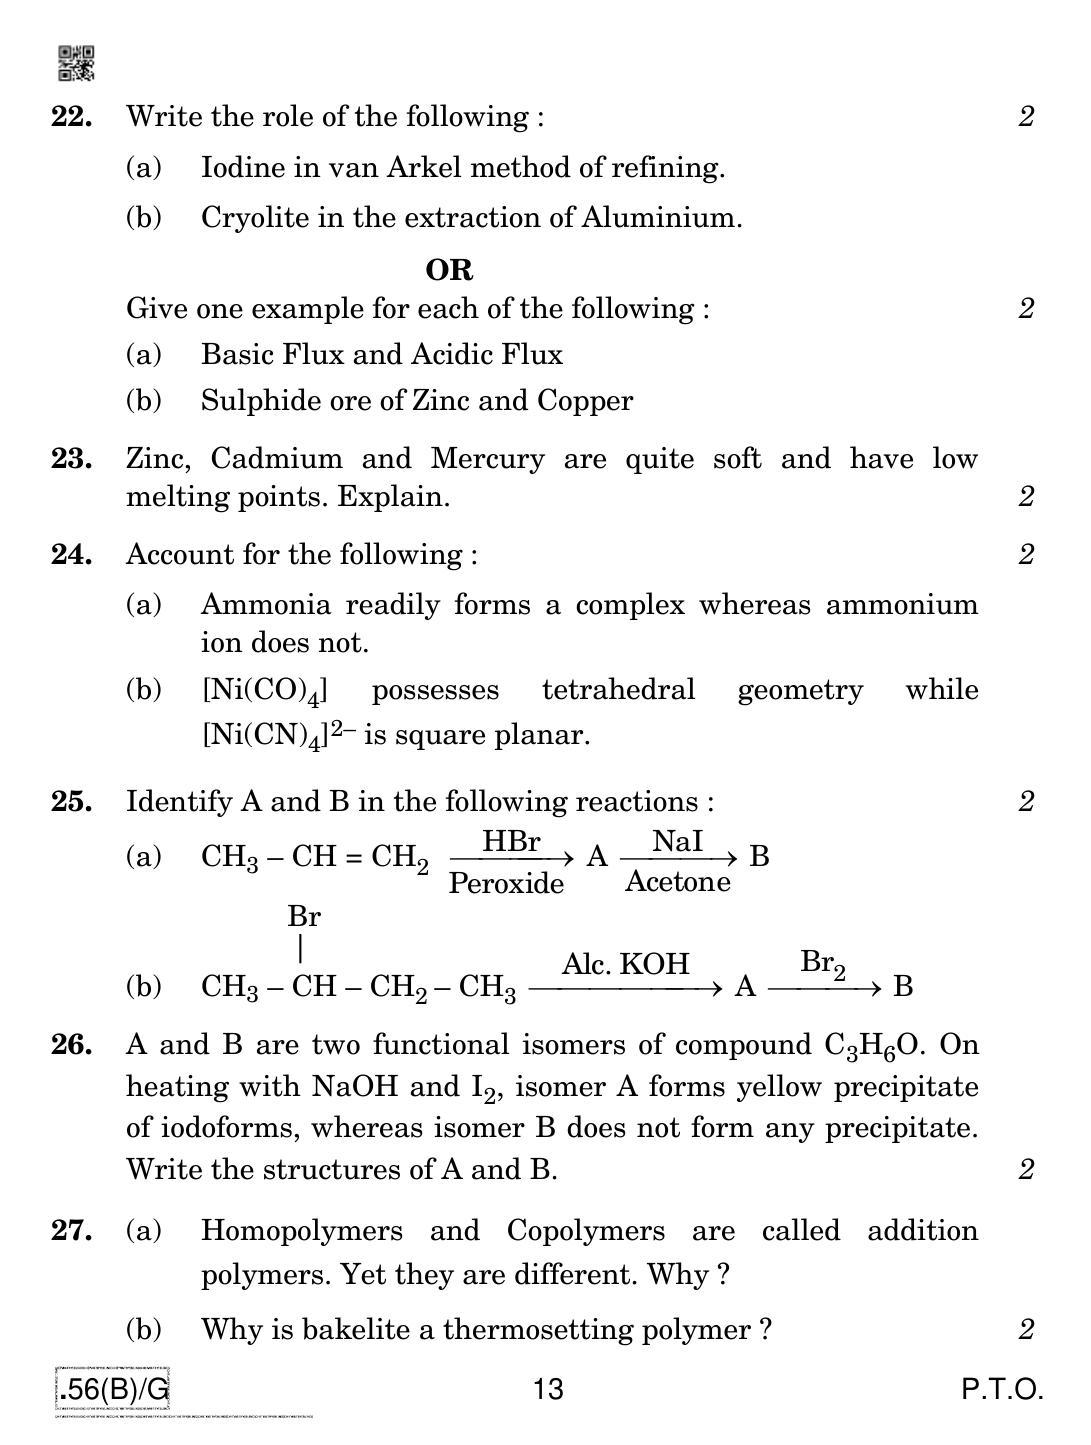 CBSE Class 12 56(B)-C - Chemistry For Blind Candidates 2020 Compartment Question Paper - Page 13